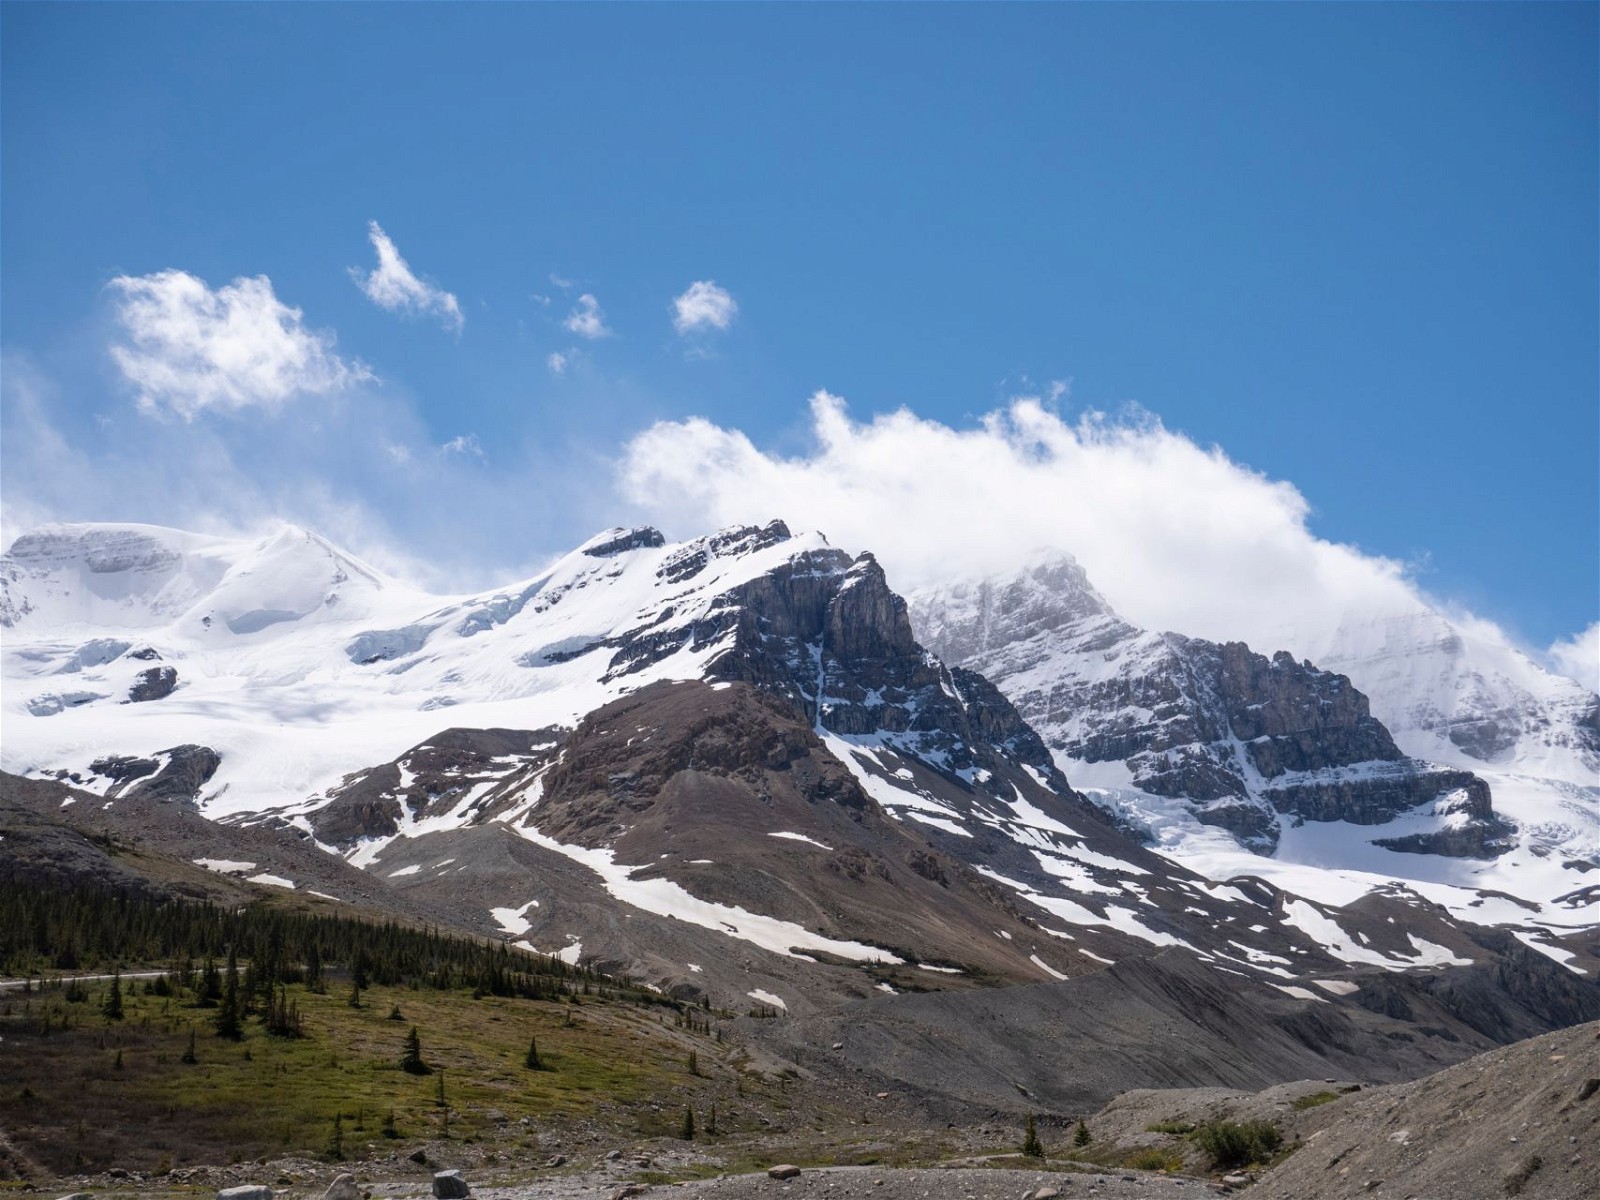 Columbia Icefield: This glacier is one of the largest glaciers in the Rocky Mountains, and there are many hiking trails that tourists can visit.